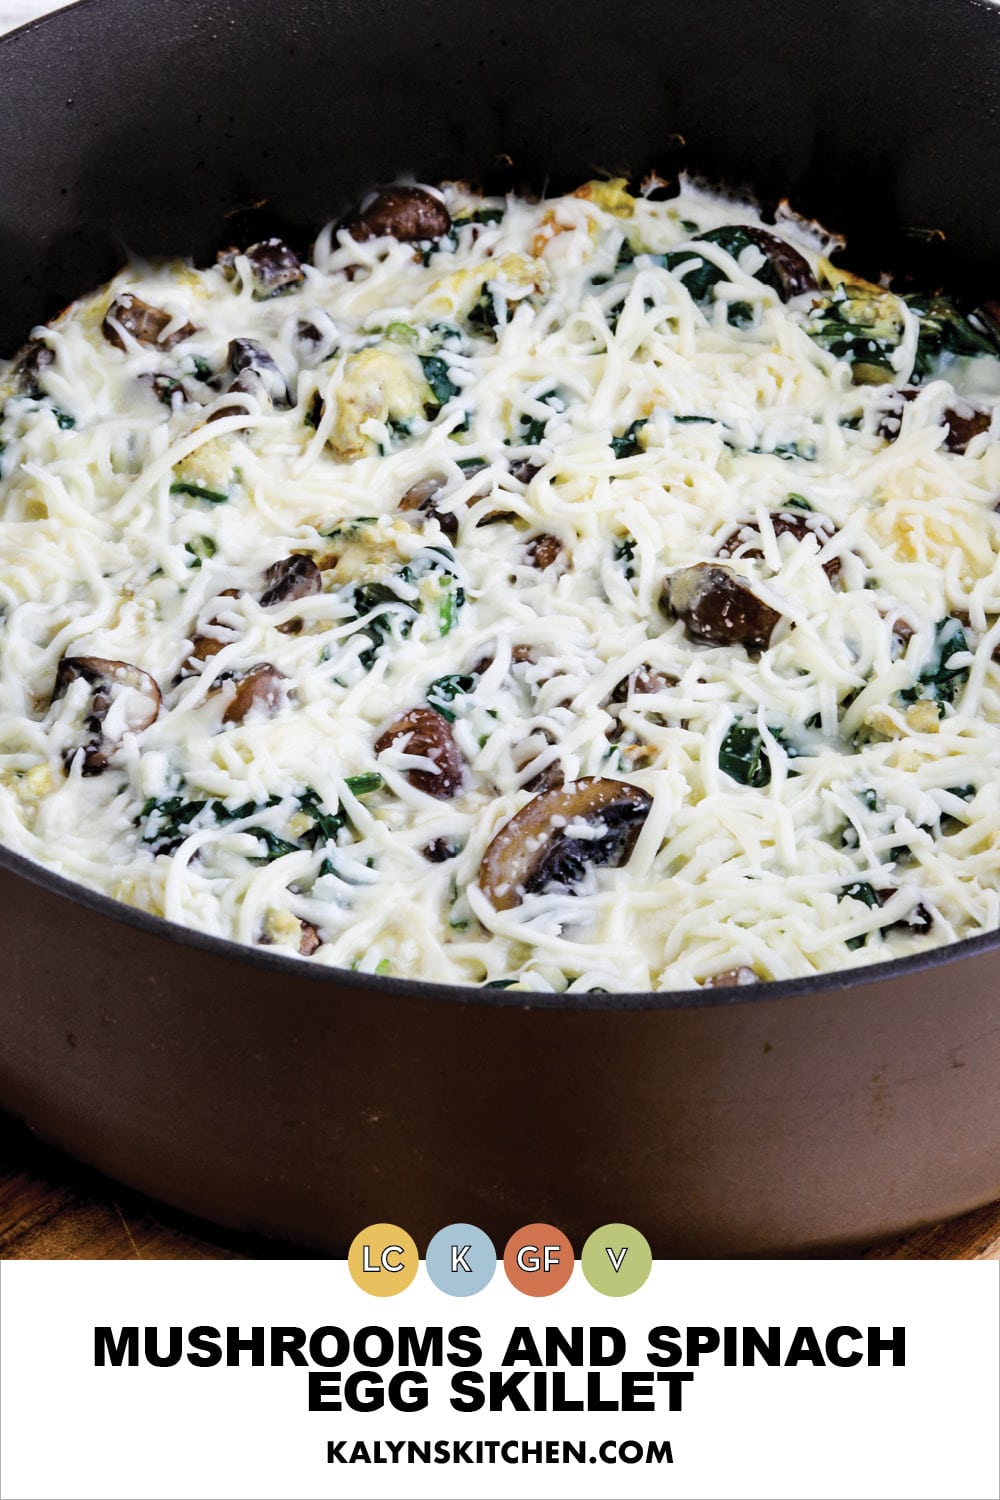 Pinterest image of Mushrooms and Spinach Egg Skillet